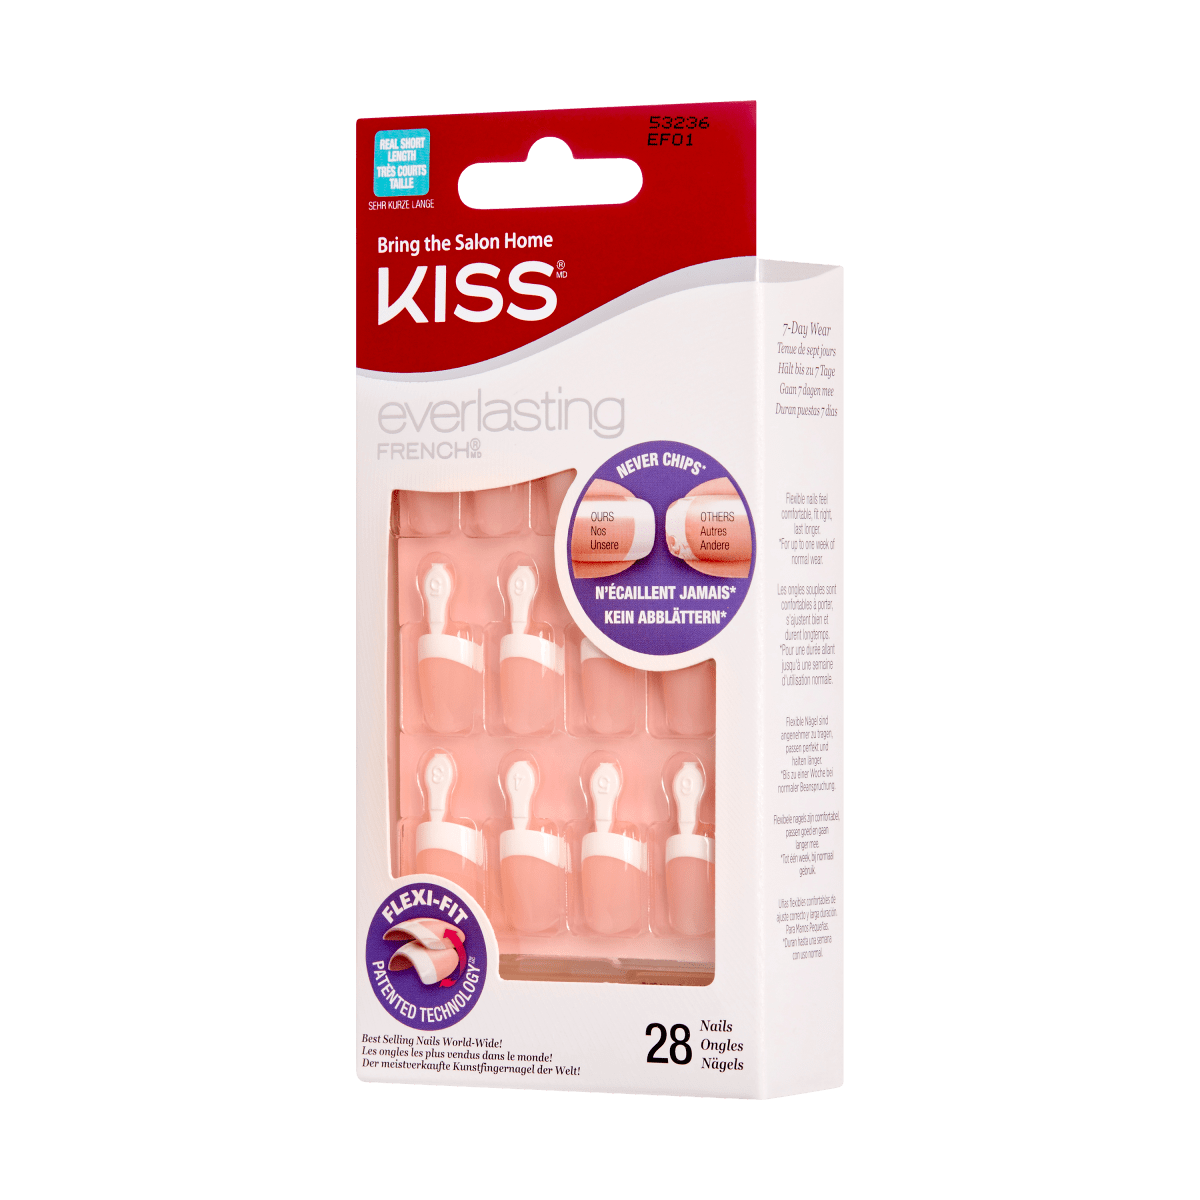 KISS Everlasting, Press-On Nails, Endless, White, Real Short Squoval, 28ct